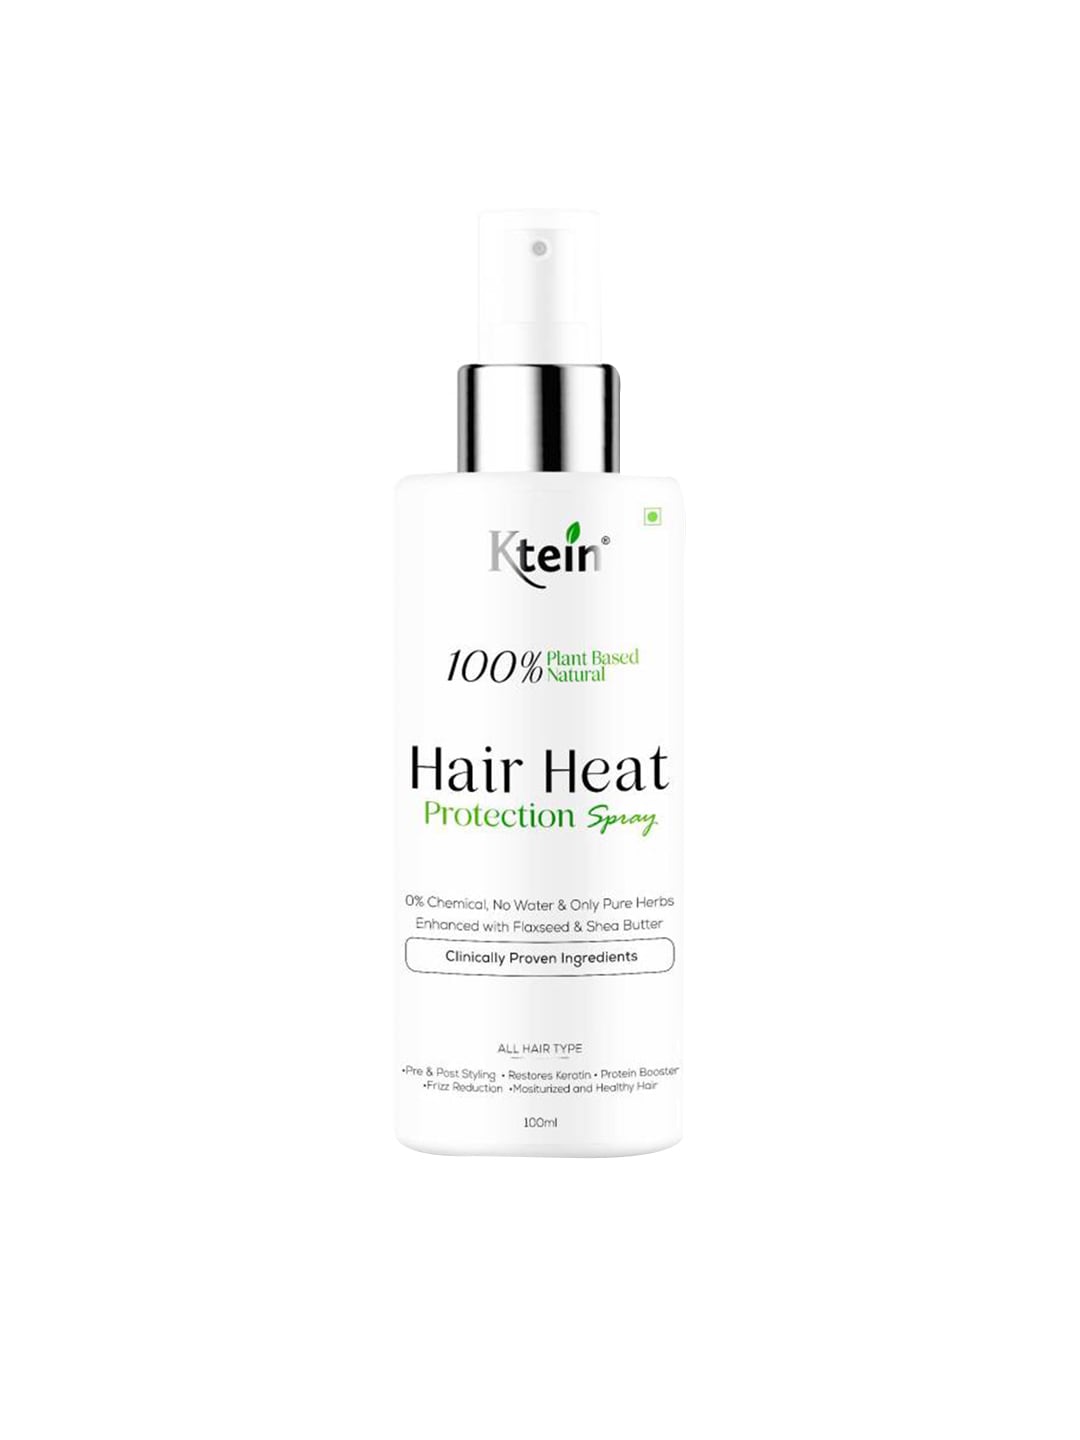 Ktein White Plant Based Heat Protection Spray Price in India